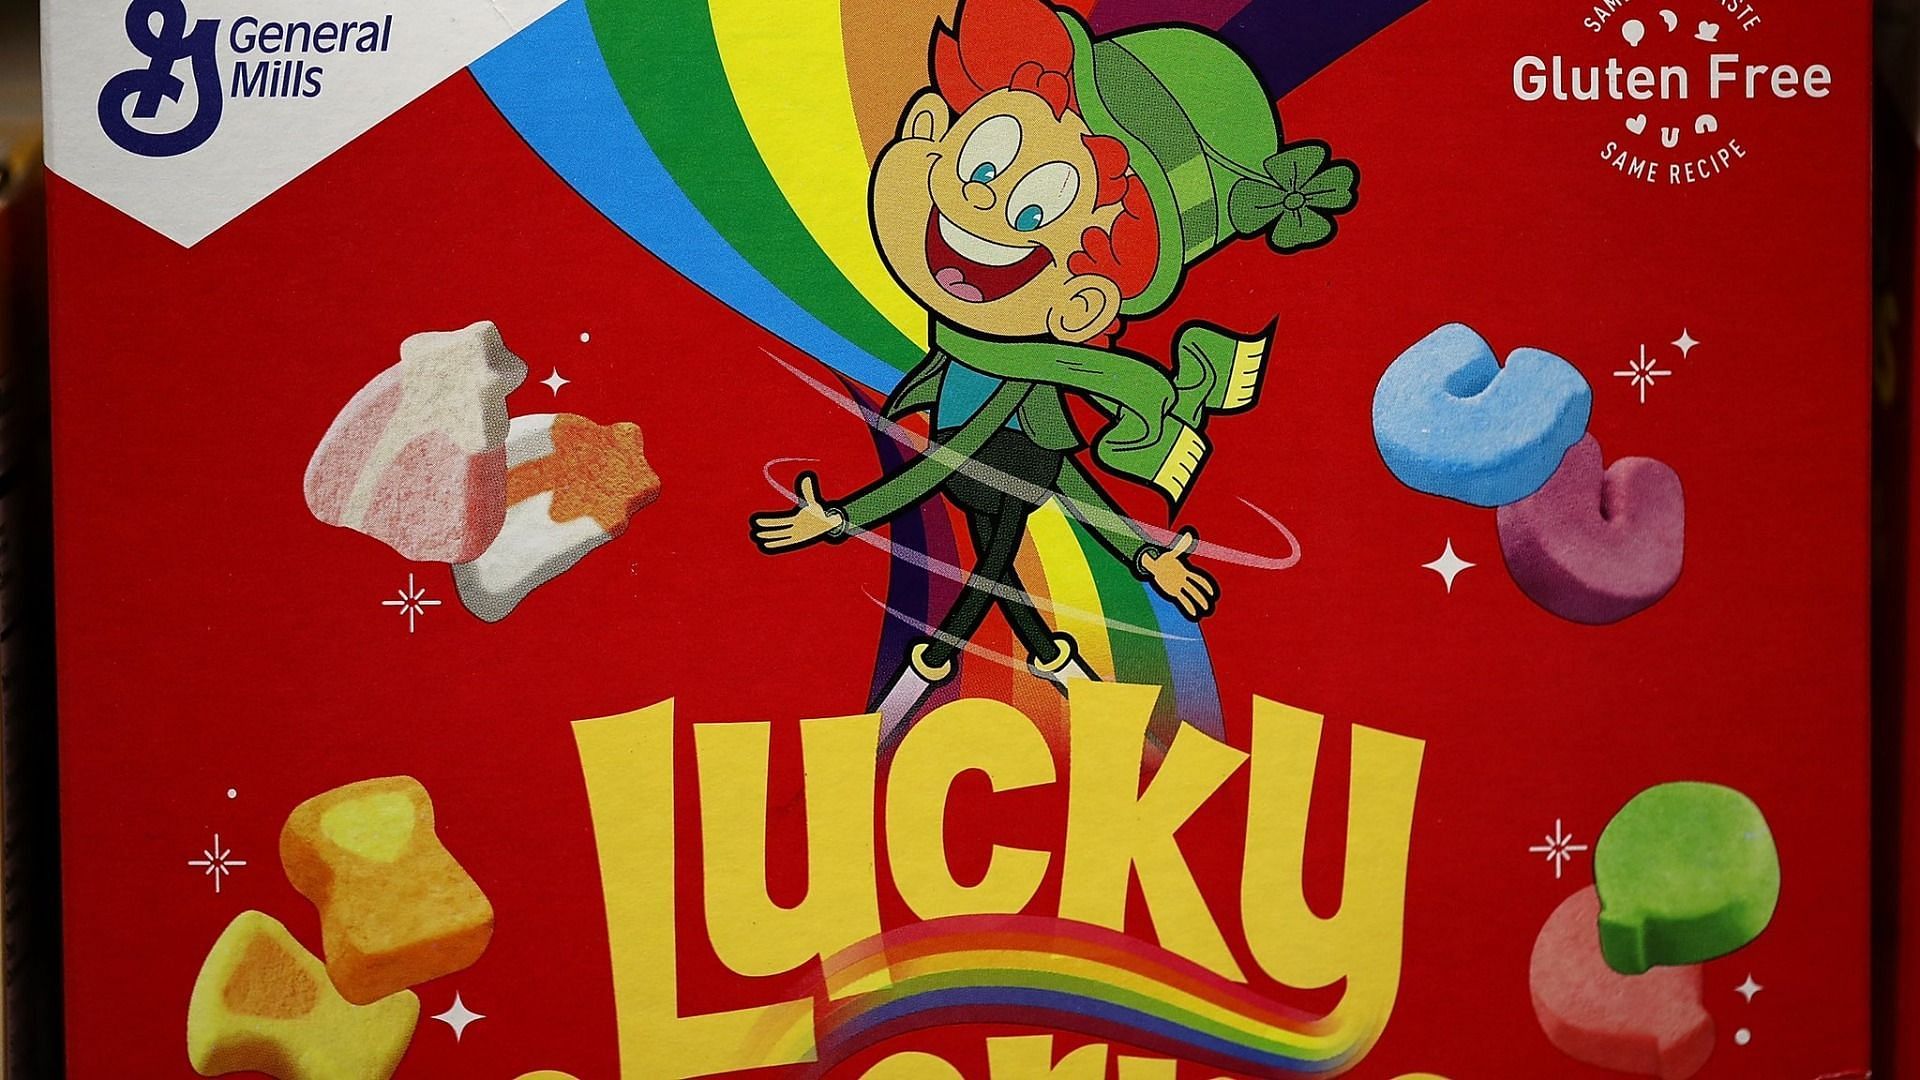 Lucky Charms is reportedly sickening people, with many complaining about symptoms like nausea, diarrhea, and vomiting after consuming it (Image via Justin Sullivan/Getty Images)